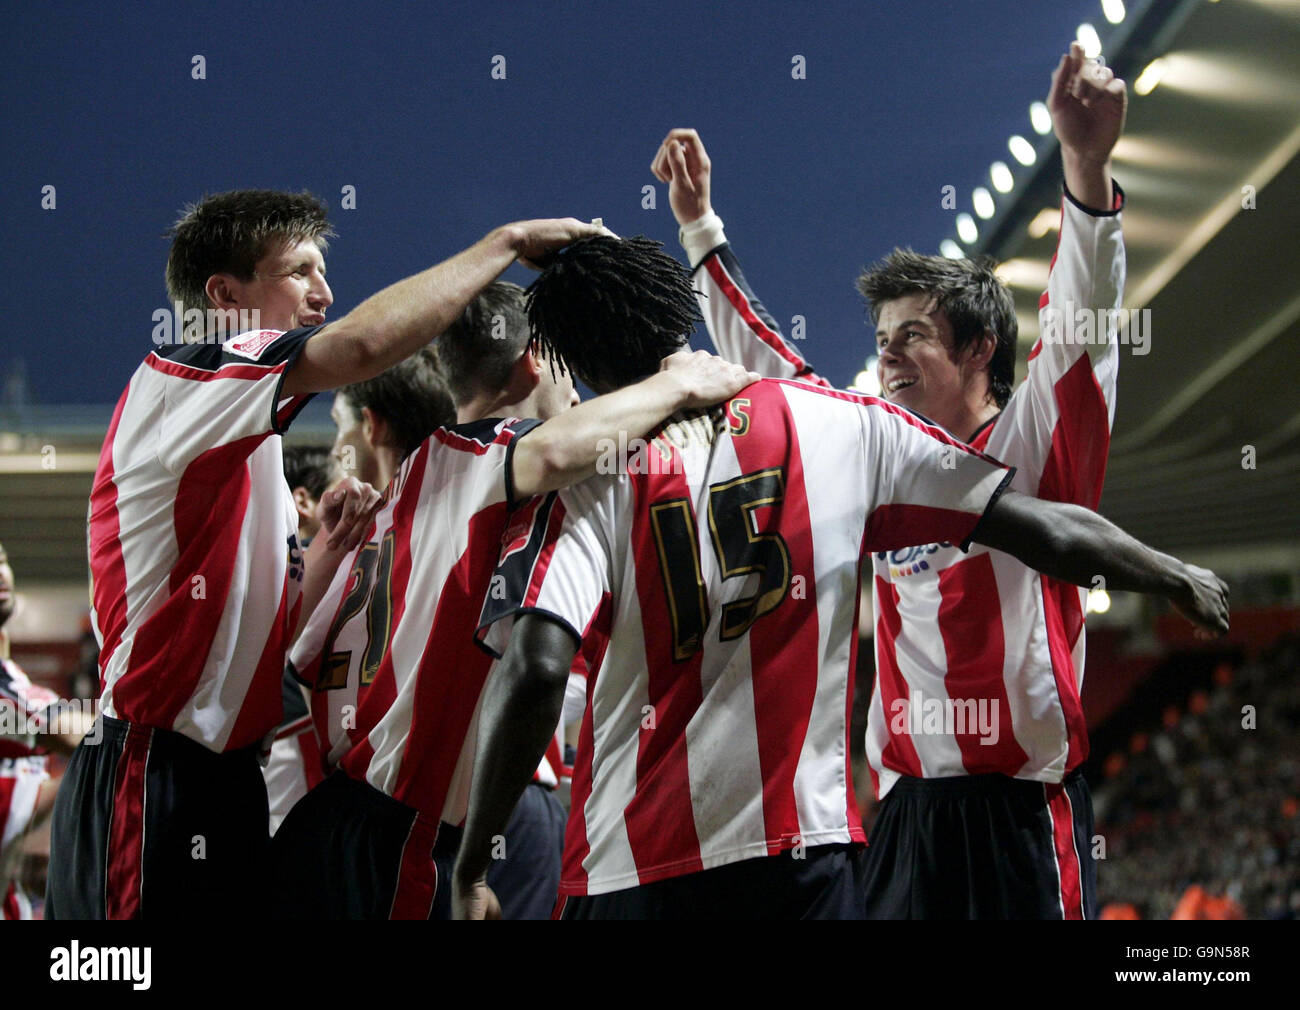 Southampton's Kenwyne Jones (centre) celebrates with team-mates after scoring against Norwich City during the Coca-Cola Championship match at St Mary's Stadium, Southampton. Stock Photo